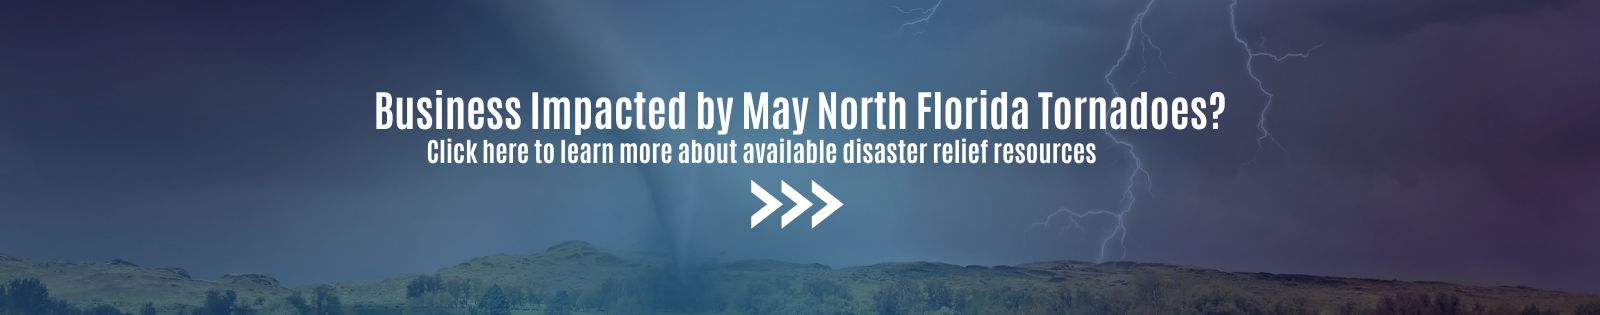 Business impacted by May North Florida Tornado. Click to learn more about available disaster relief resources 